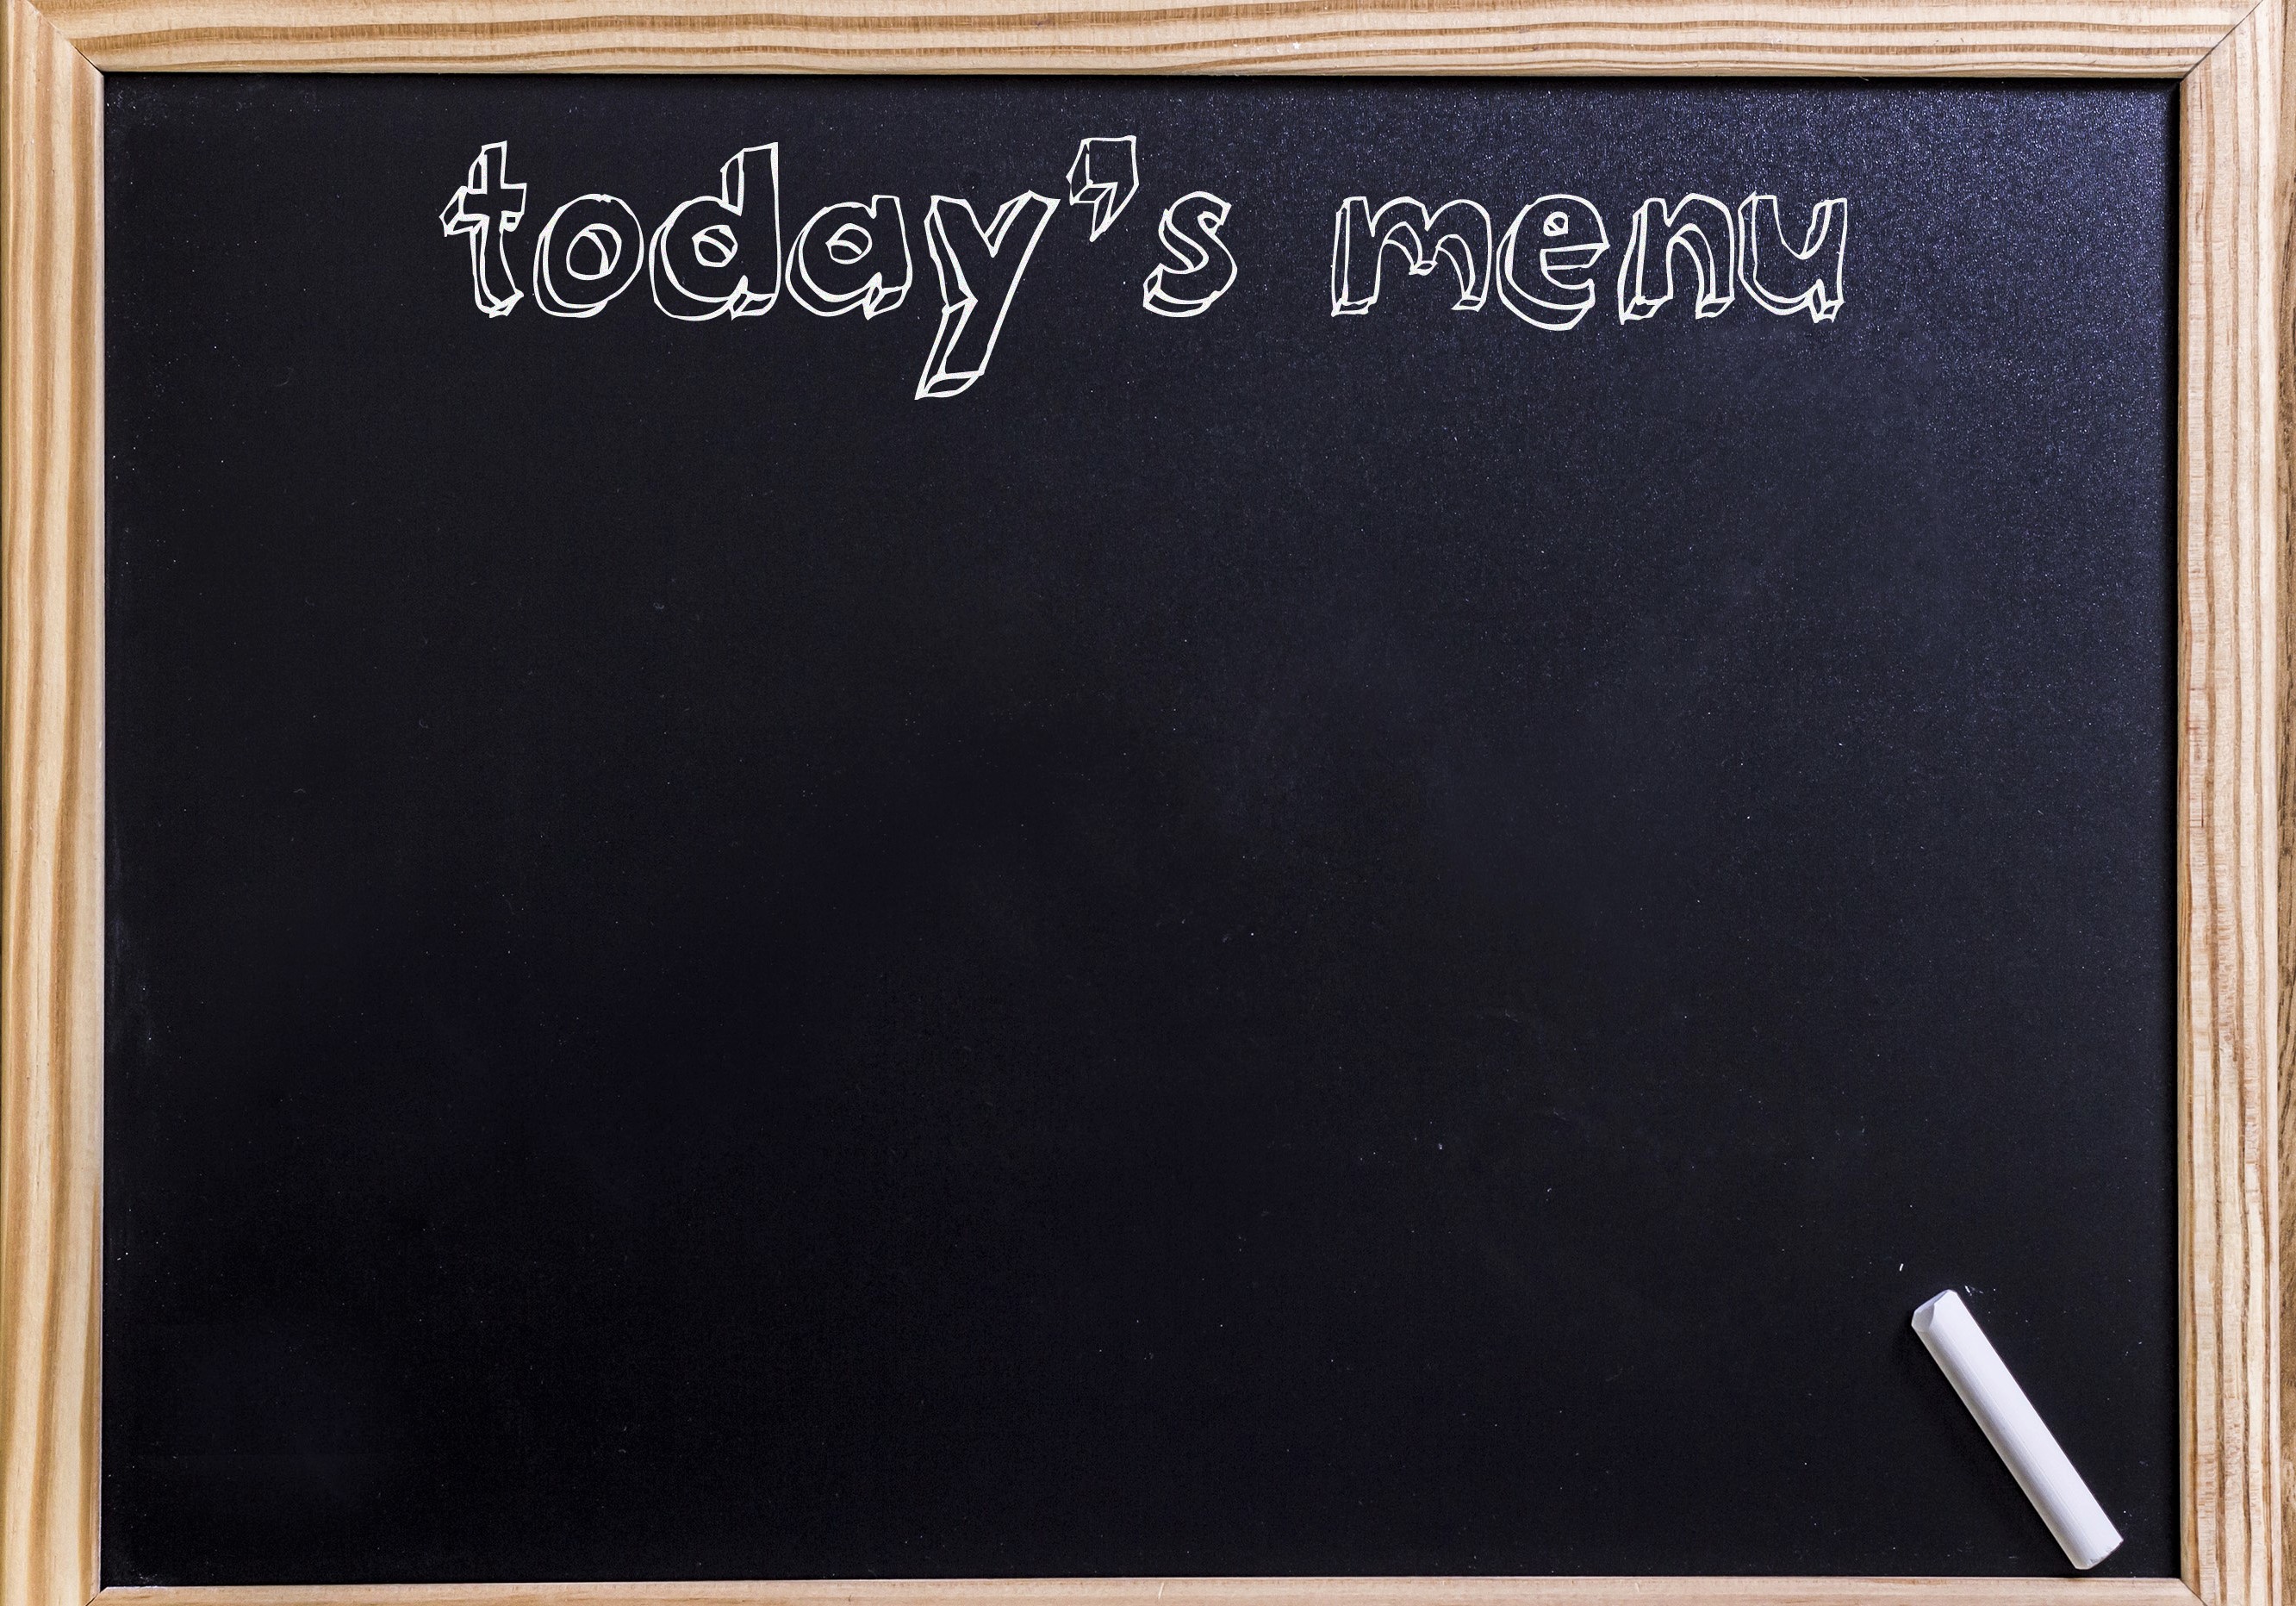 Today's menu - New chalkboard with 3D outlined text - on wood